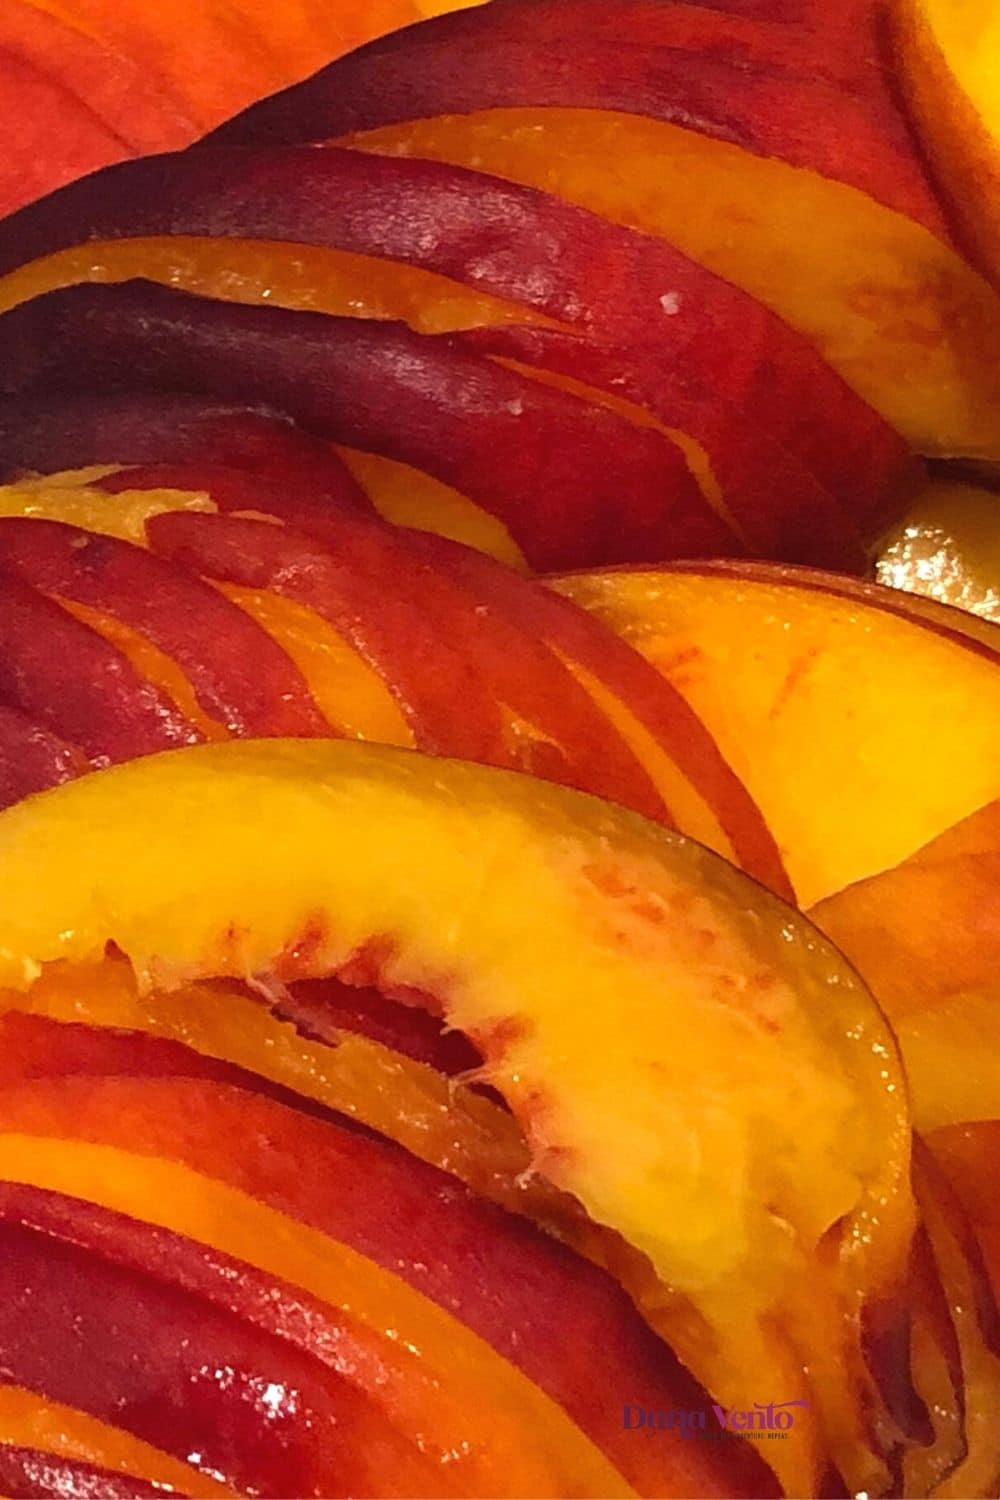 Fresh sliced peaches without the pit to puree